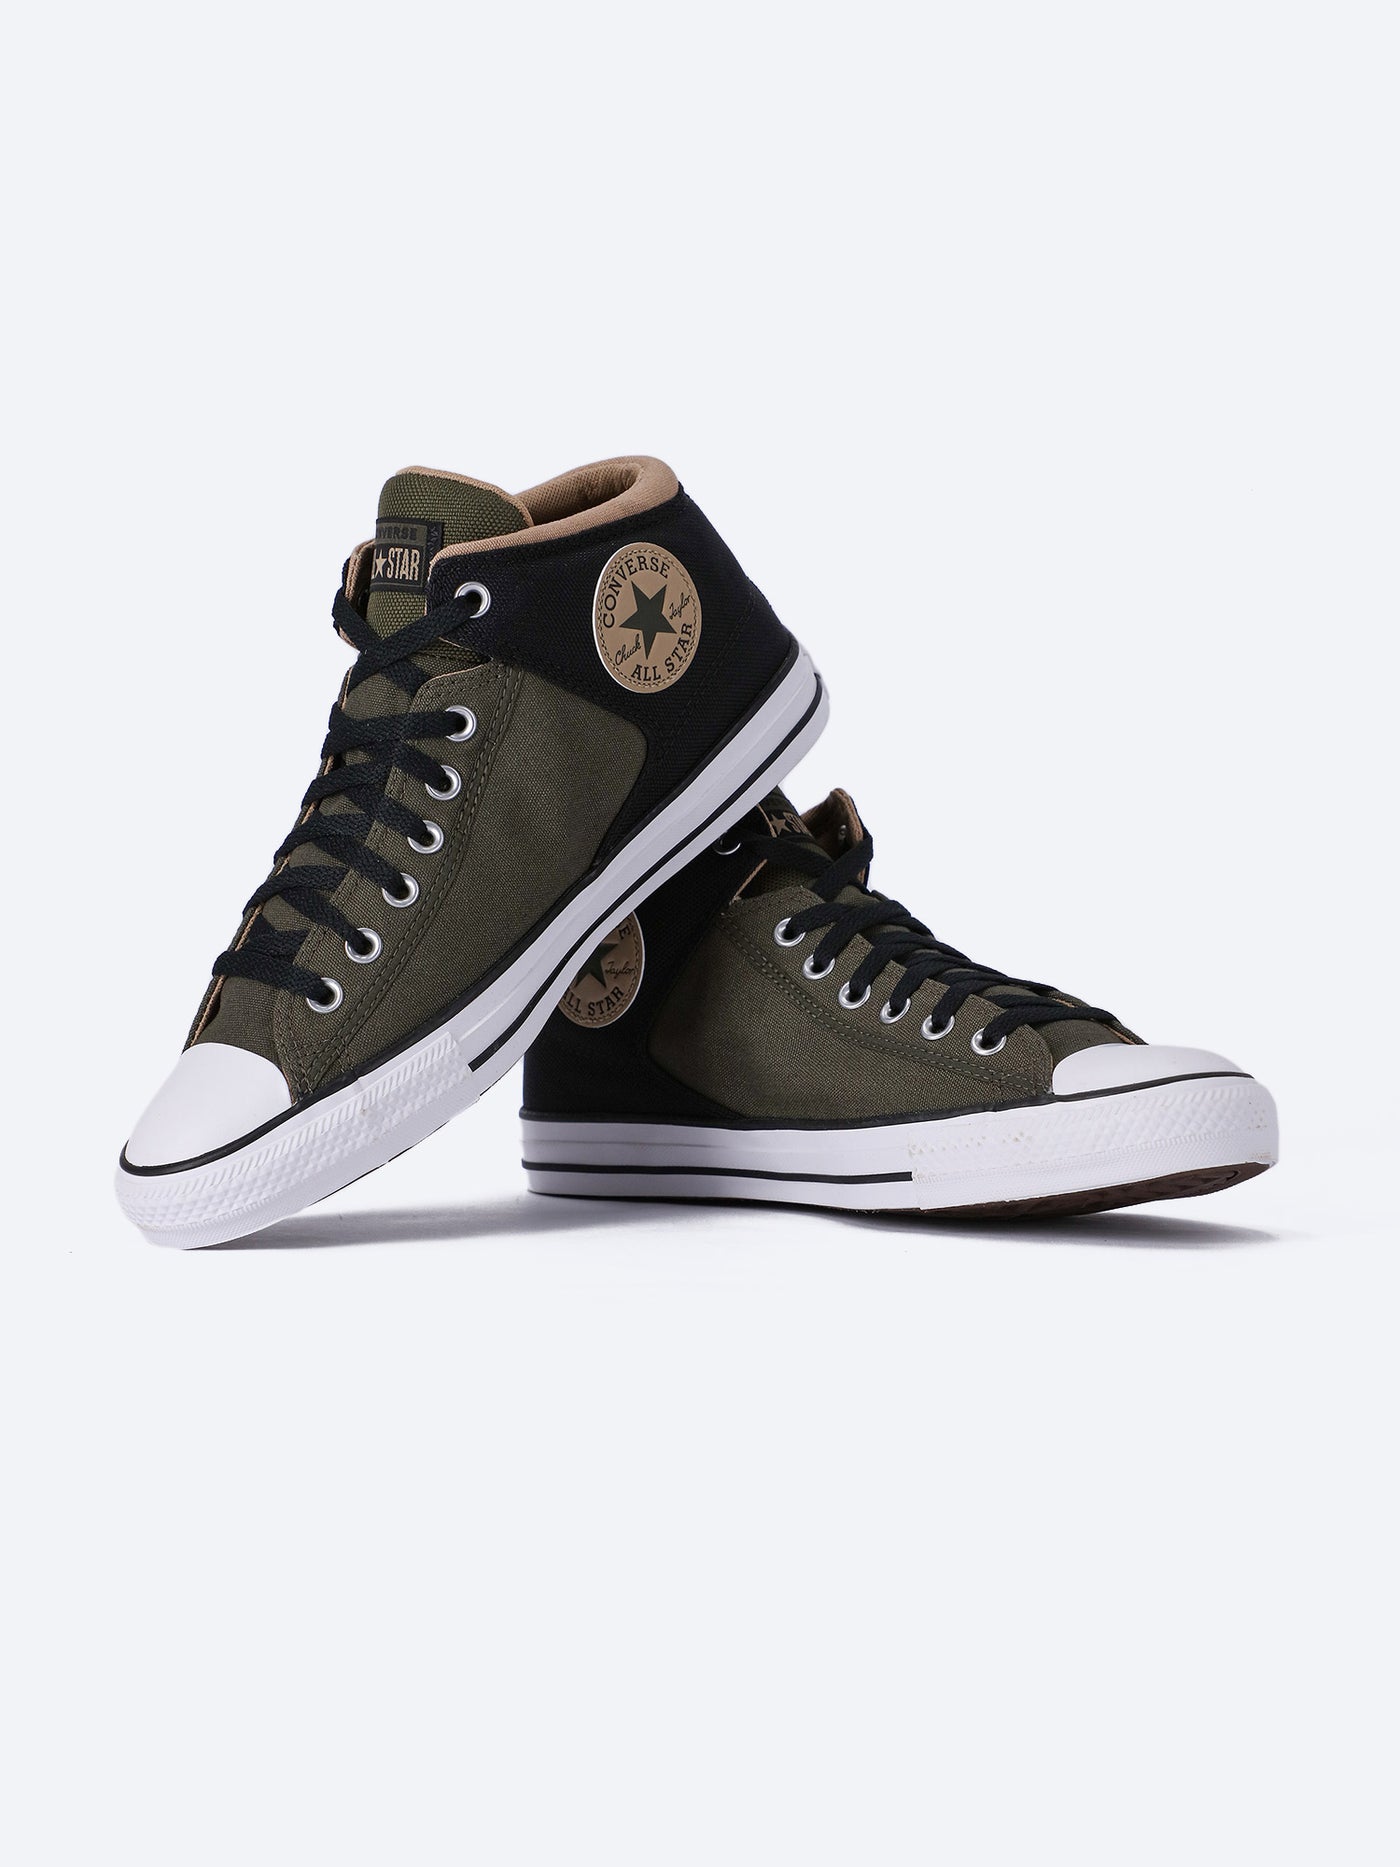 Converse Men's Chuck Taylor All Star Street Hybrid Texture Mid Sneaker Shoes